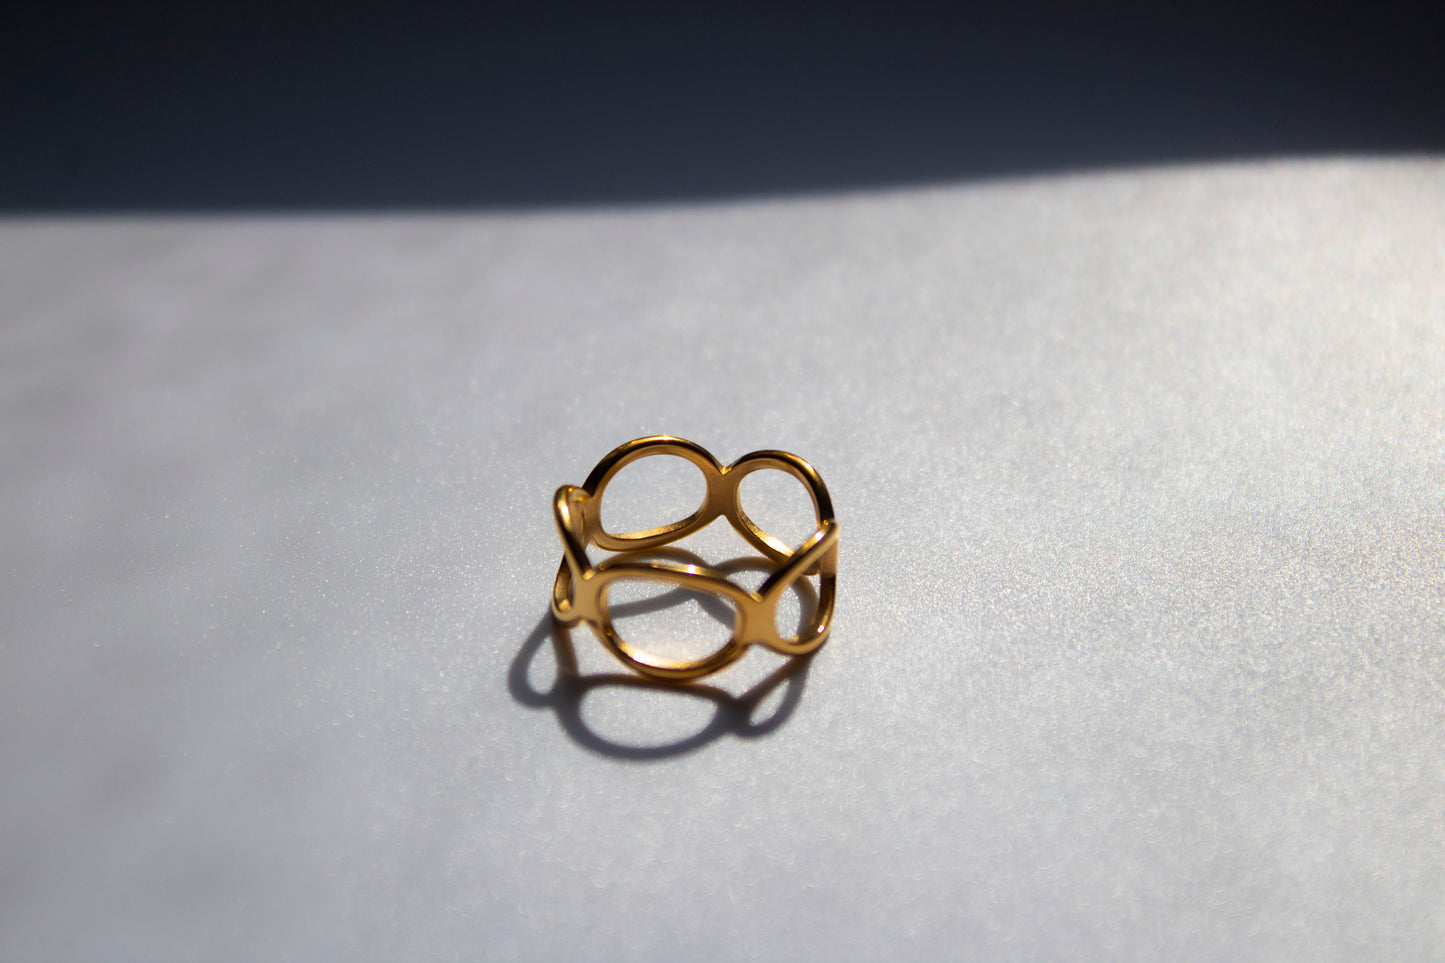 The Open Tail Ring